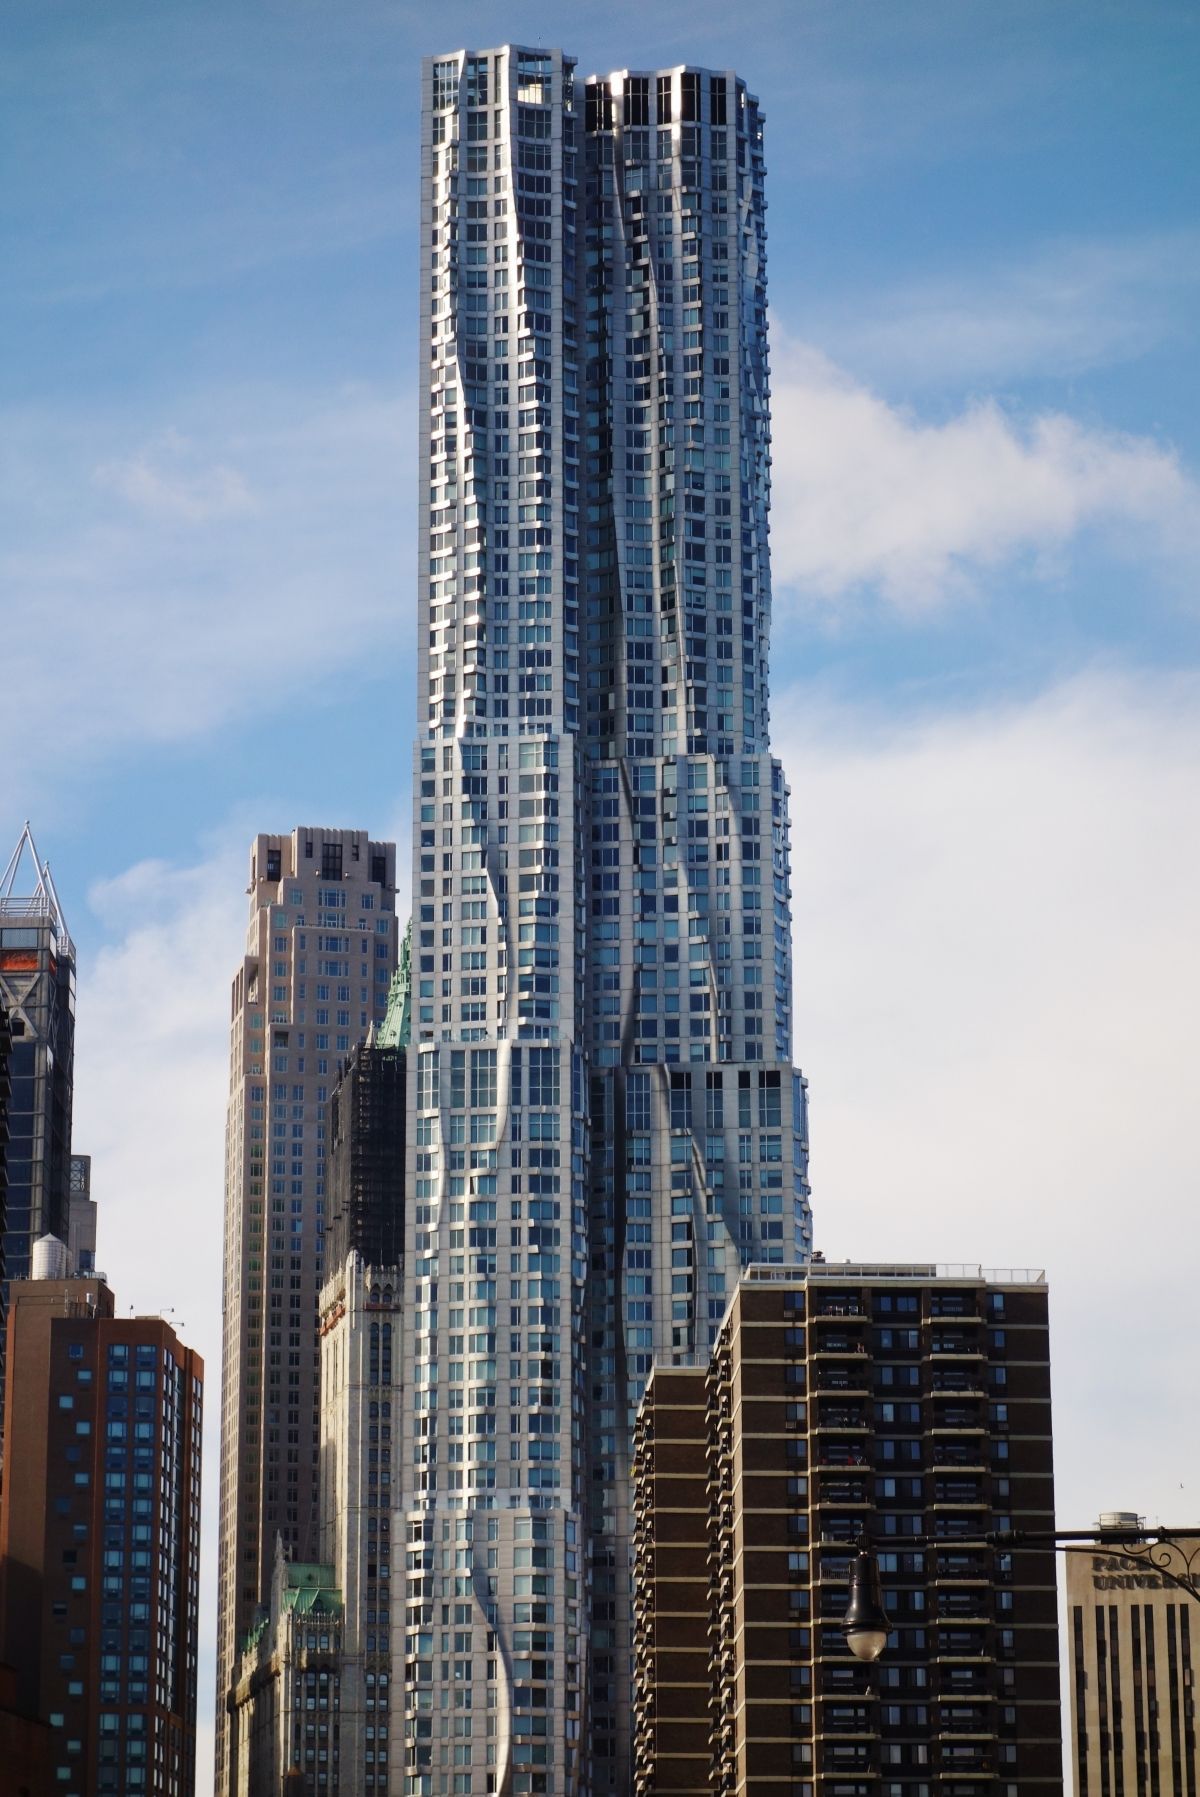 8 Spruce Street, New York by Frank Gehry